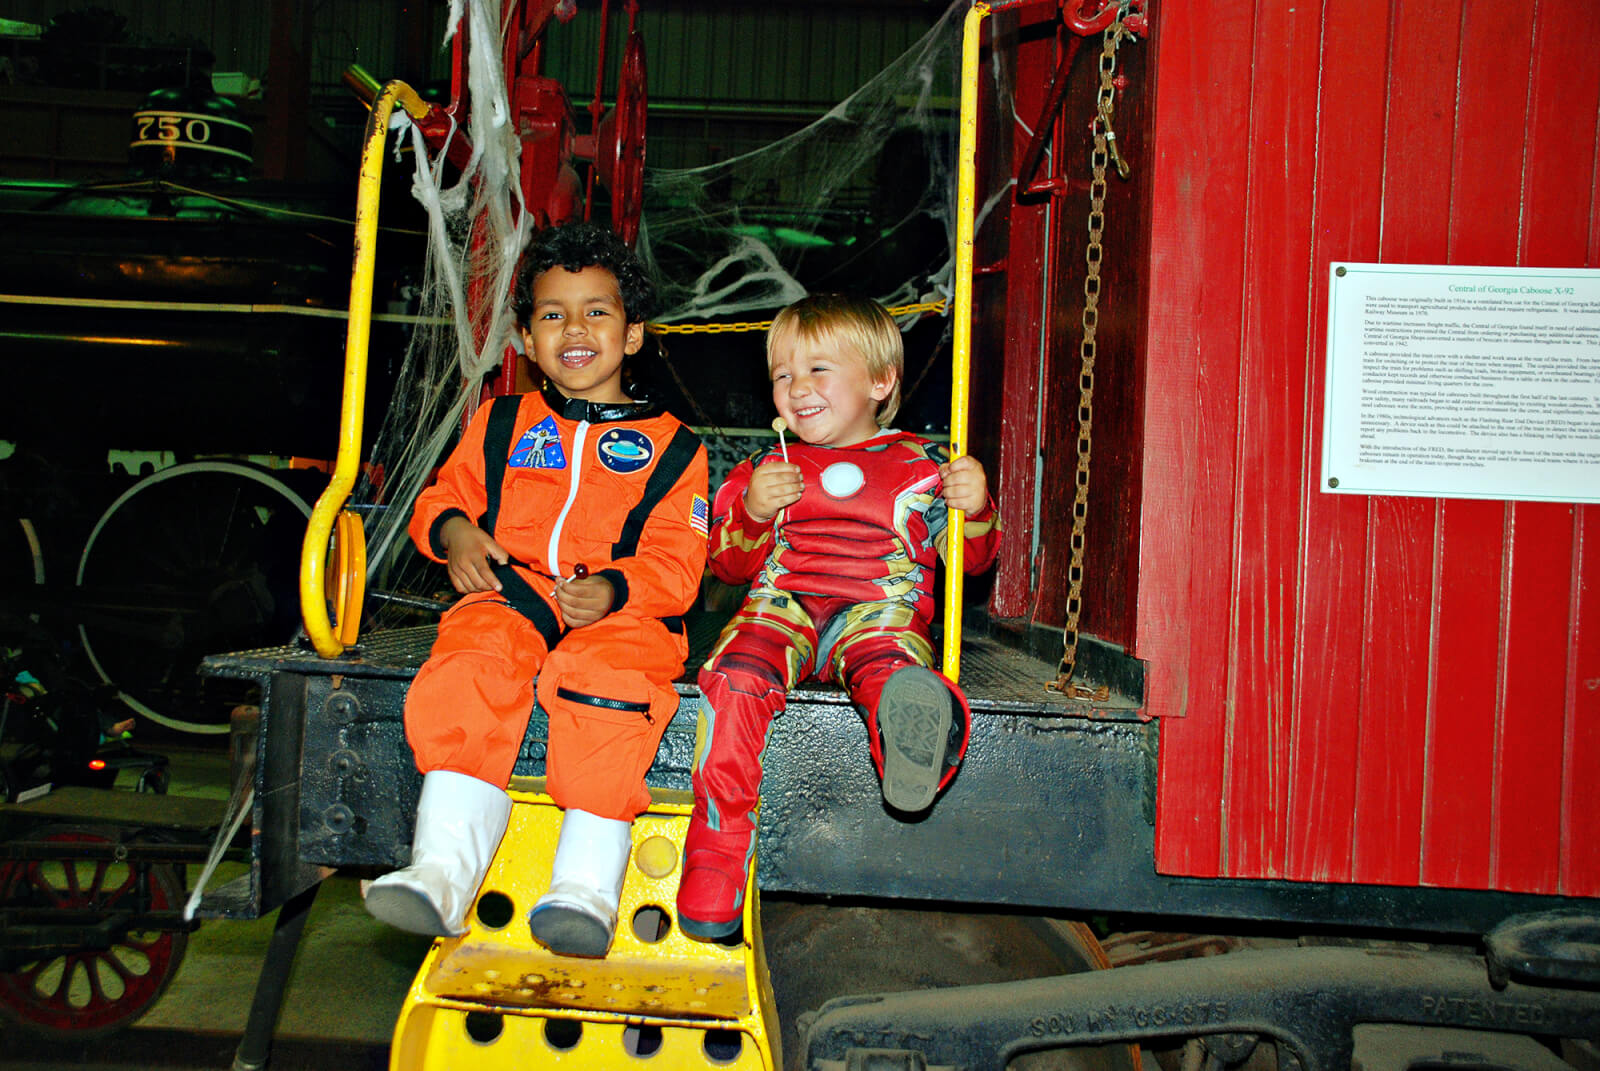 Two boys sit and laugh on the end of a train caboose, while dressed in costumes and eating candy, at Train or Treat - an annual Halloween event at Southeastern Railway Museum. 